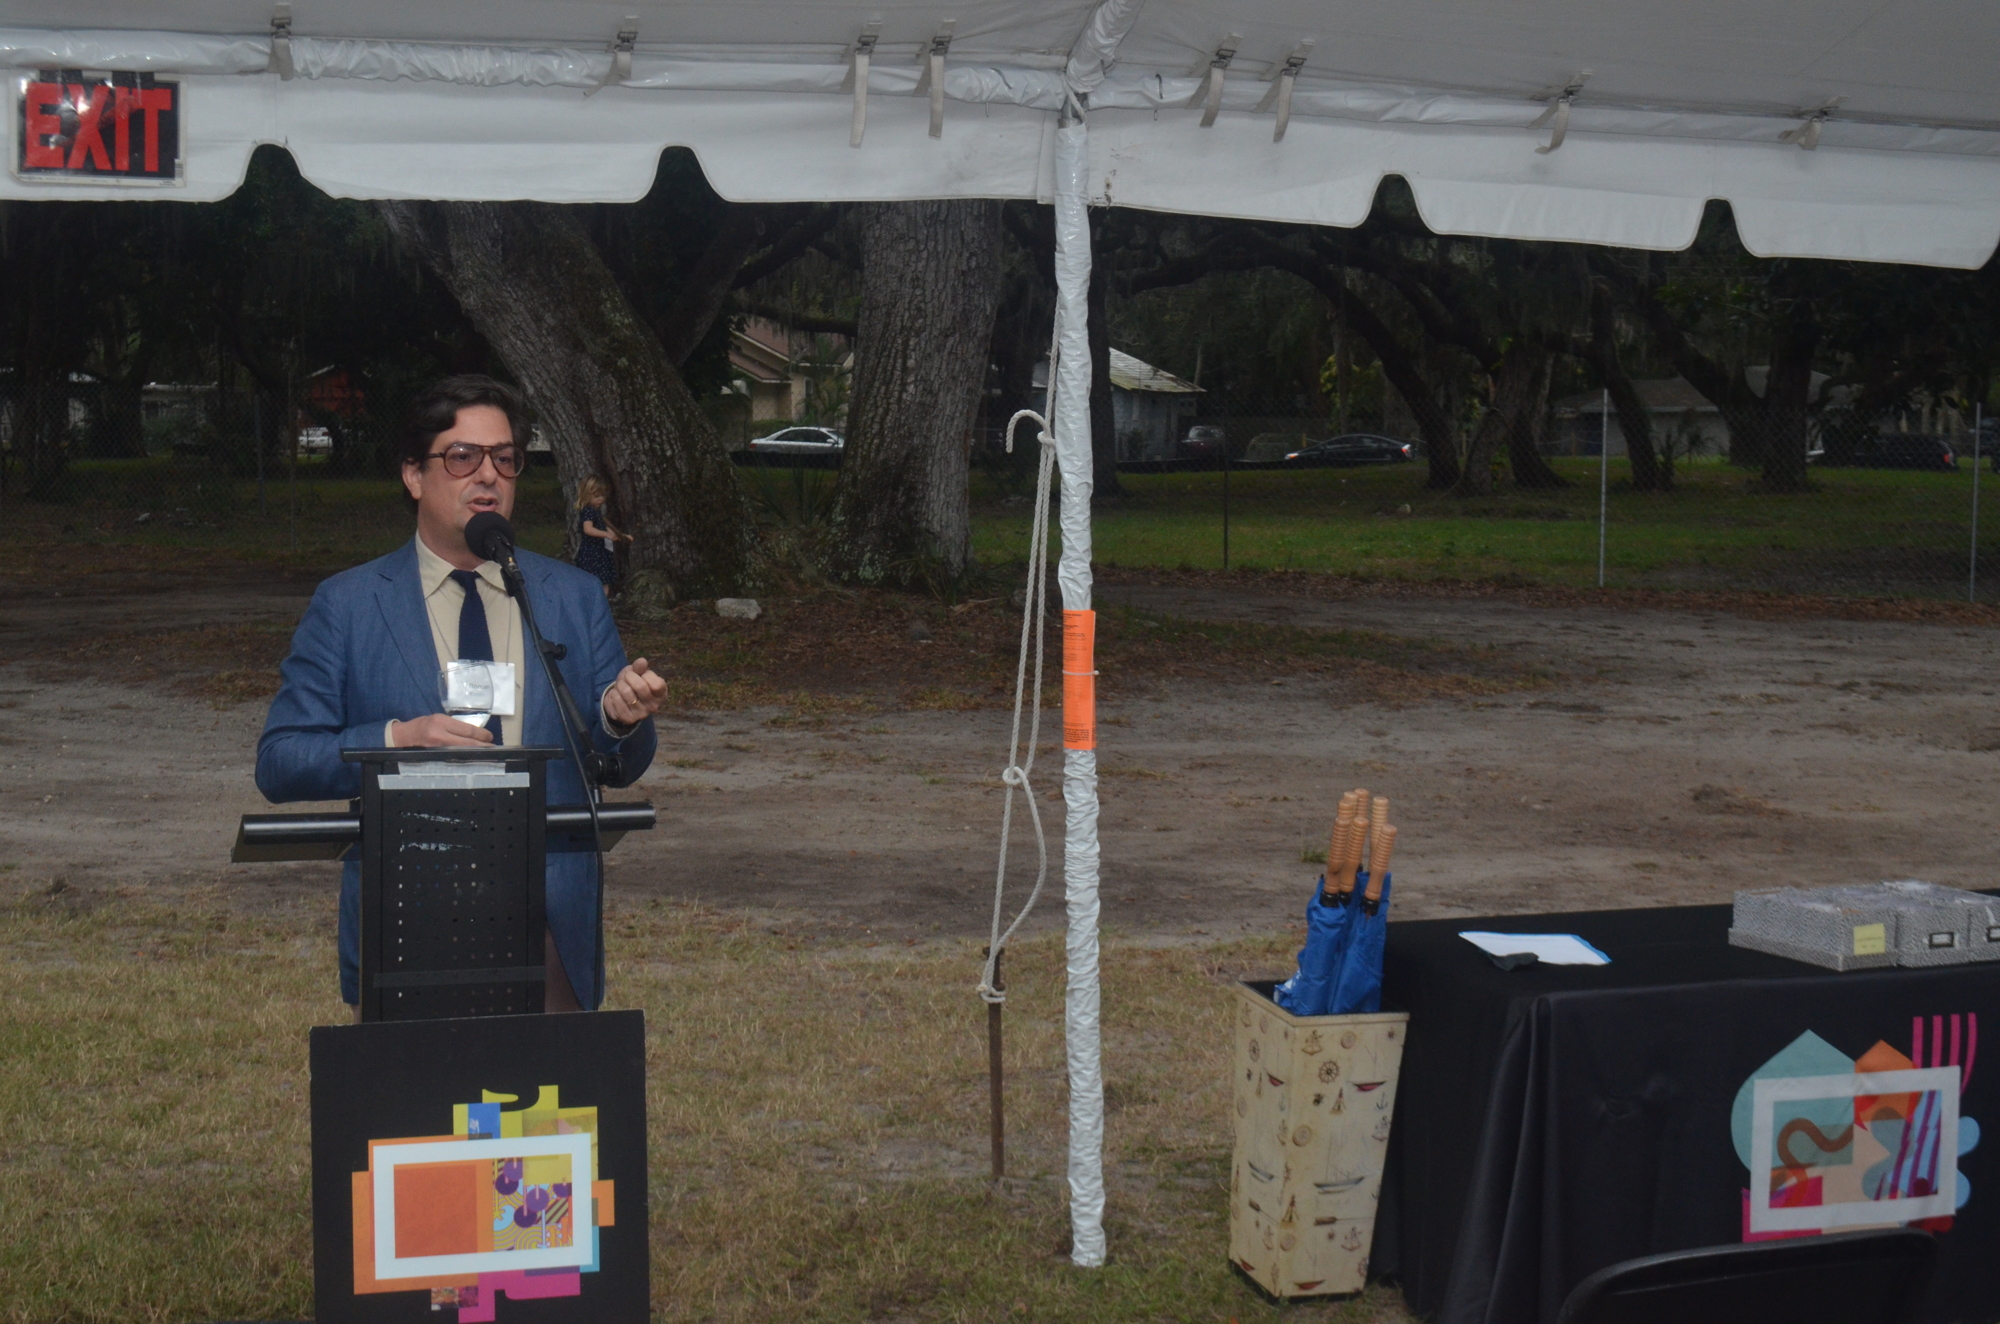 Filmmaker, screenwriter and producer Roman Coppola was on hand to commemorate the ground breaking. Coppola helped design the technical aspects of the facility.